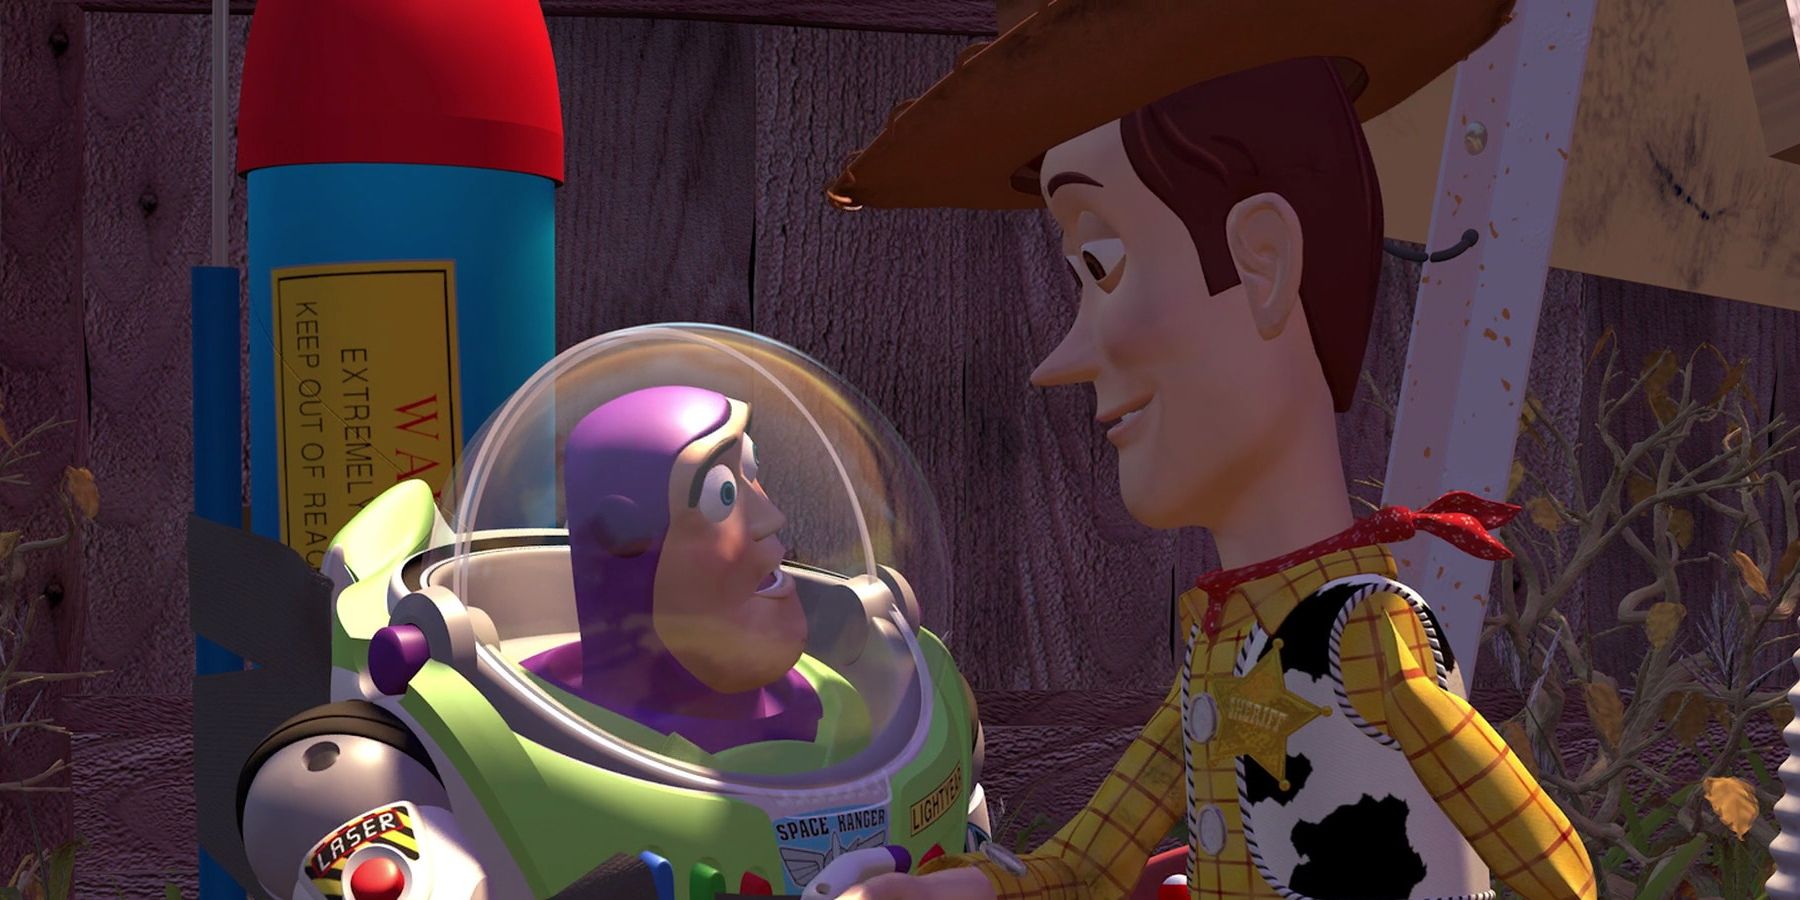 Woody and Buzz shake hands on Toy Story